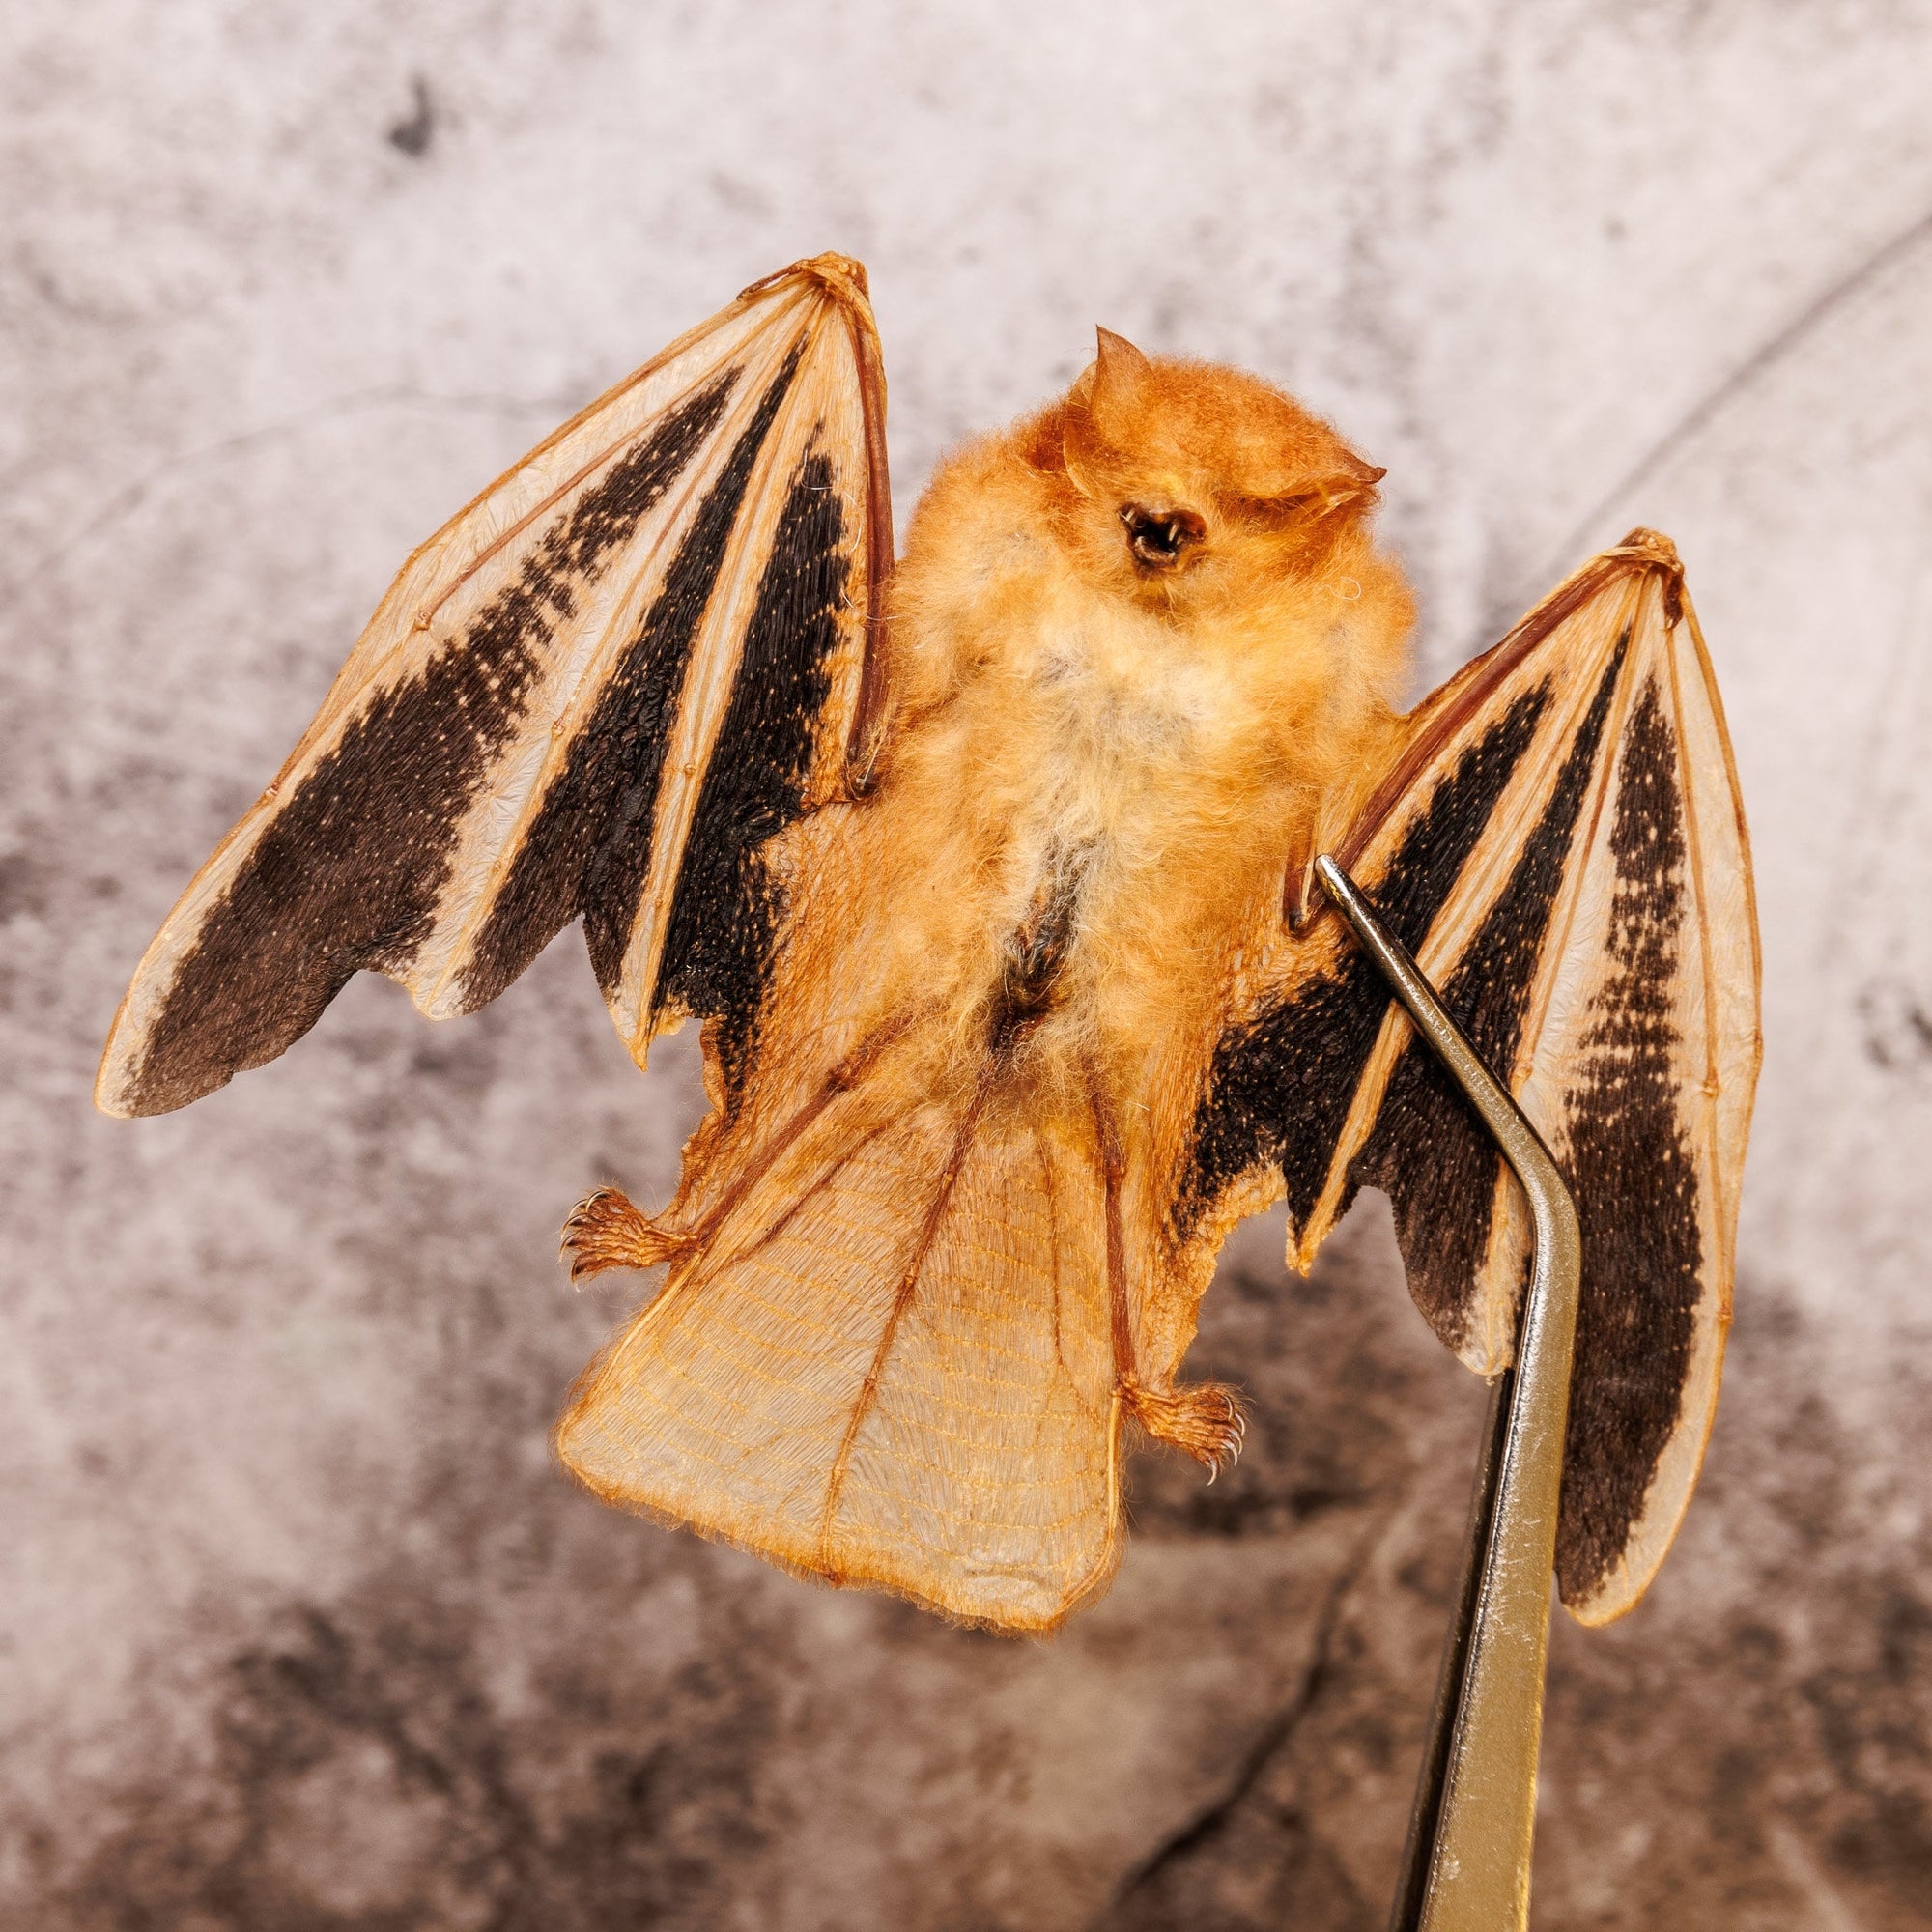 FOUR (4) Fire Bats Folded Wings (Kerivoula picta) | 4 Inch Wingspan Dry-Preserved Taxidermy (Non-CITES) Ideal for Artistic Creation